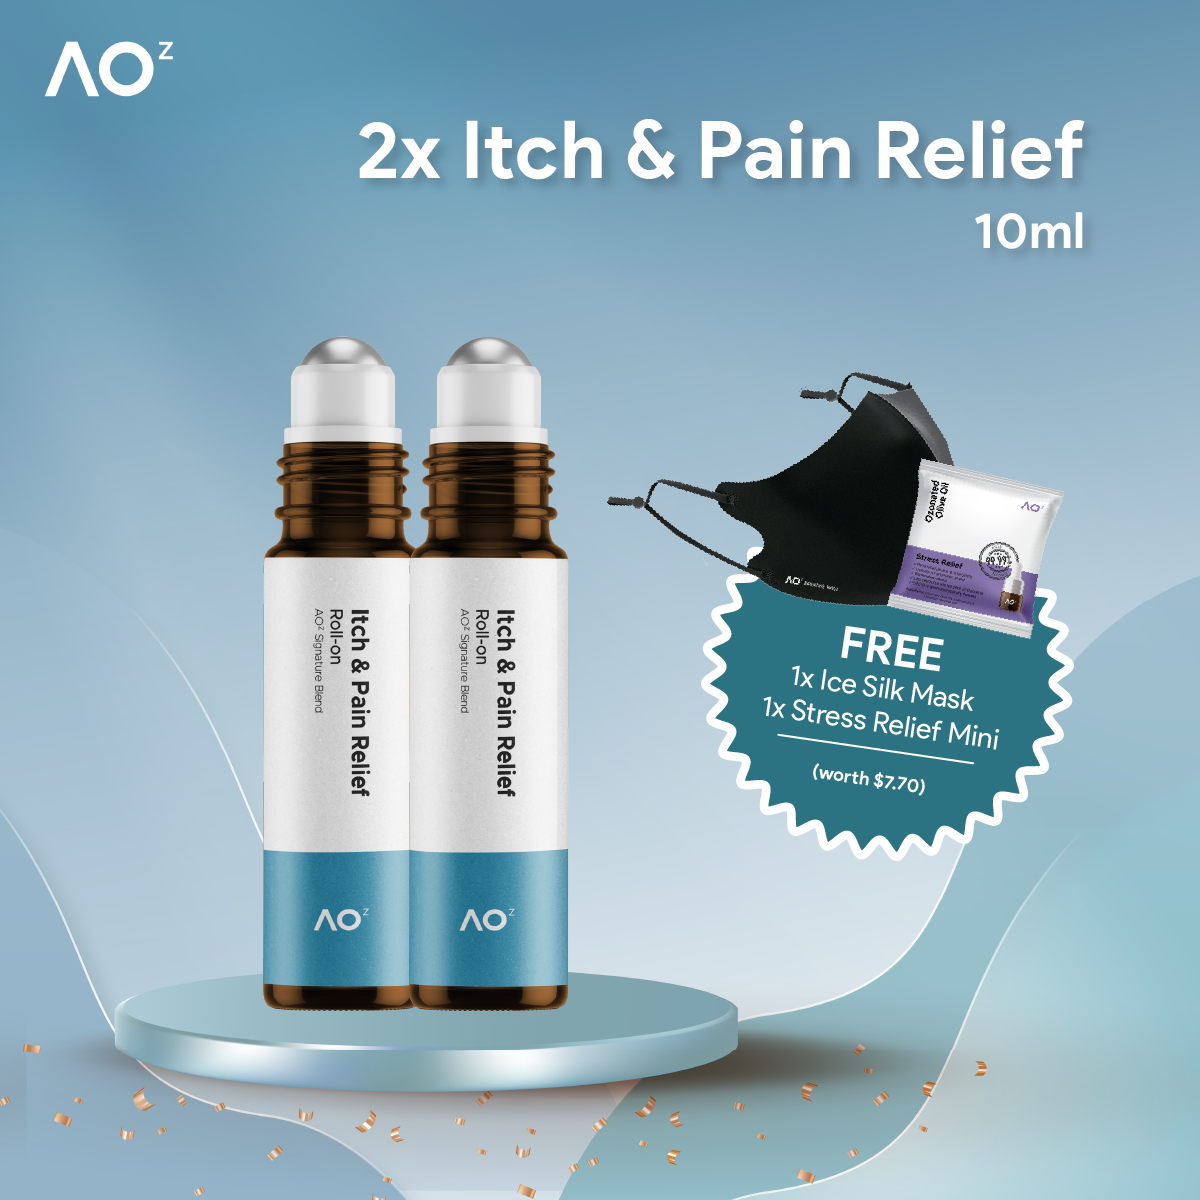 Itch & Pain Relief